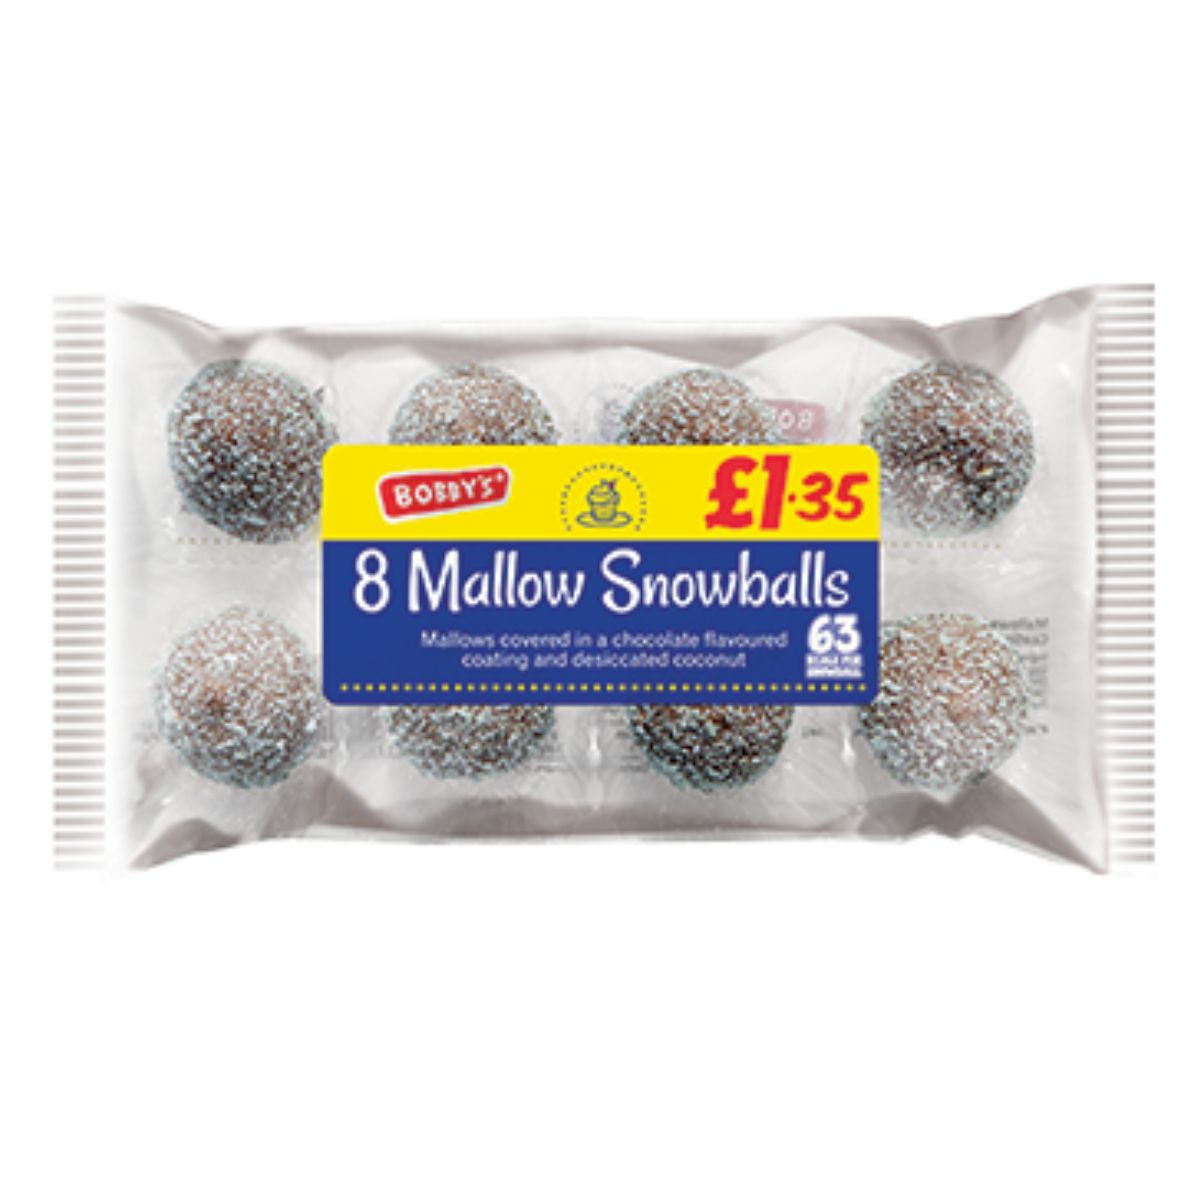 Package of 8 Bobbys mallow snowballs with a £1.35 price tag, featuring marshmallows covered in a chocolate-flavored coating and desiccated coconut.